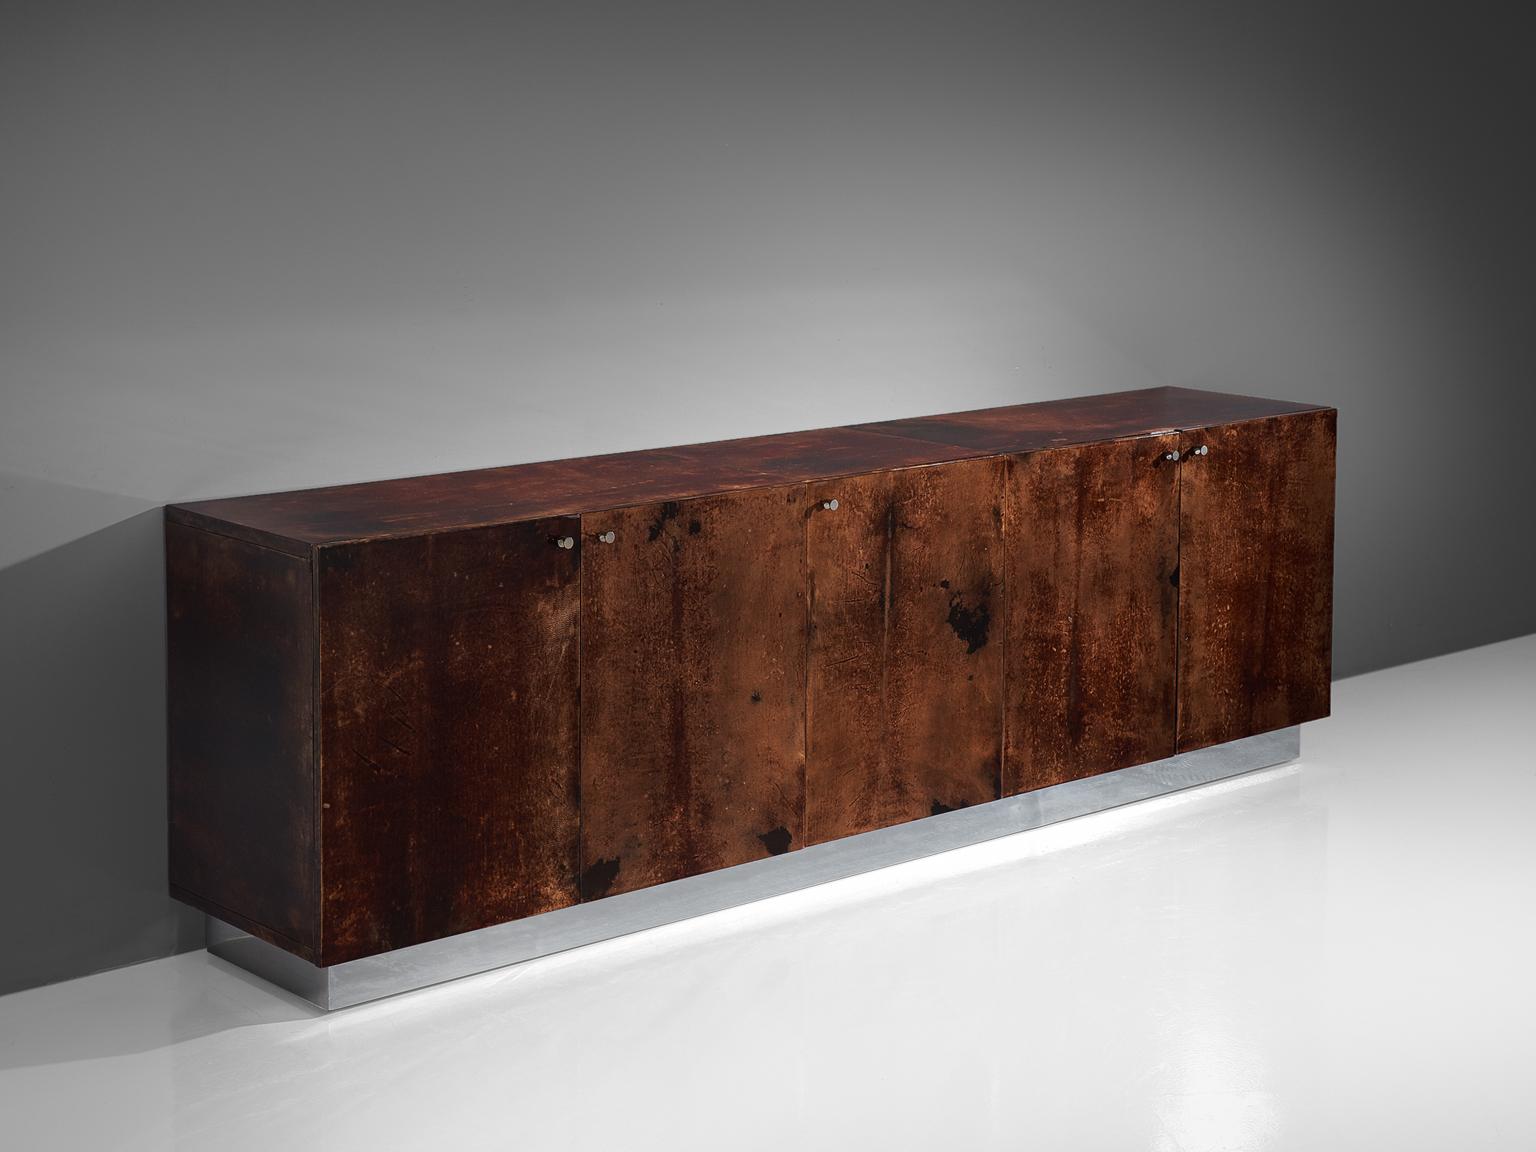 Aldo Tura, large sideboard, lacquered goatskin, wood and aluminium, Italy, circa 1970.

Very large sideboard by Aldo Tura. The lacquered goat skin shows a beautiful range of deep brown tones and provides a stunning contrast with the aluminum